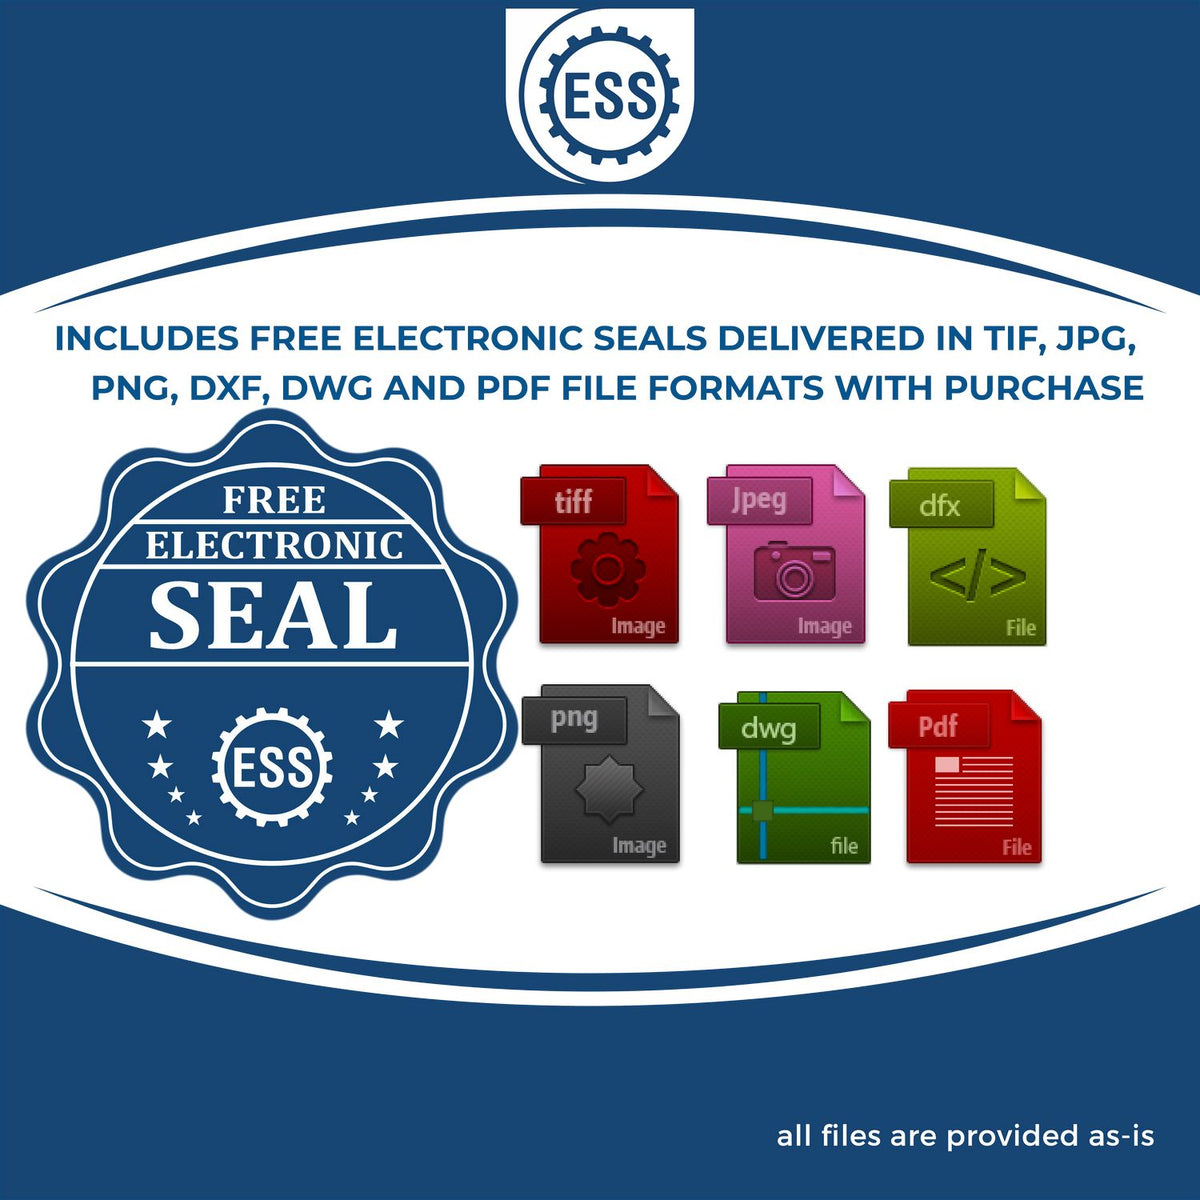 An infographic for the free electronic seal for the Gift Maryland Engineer Seal illustrating the different file type icons such as DXF, DWG, TIF, JPG and PNG.